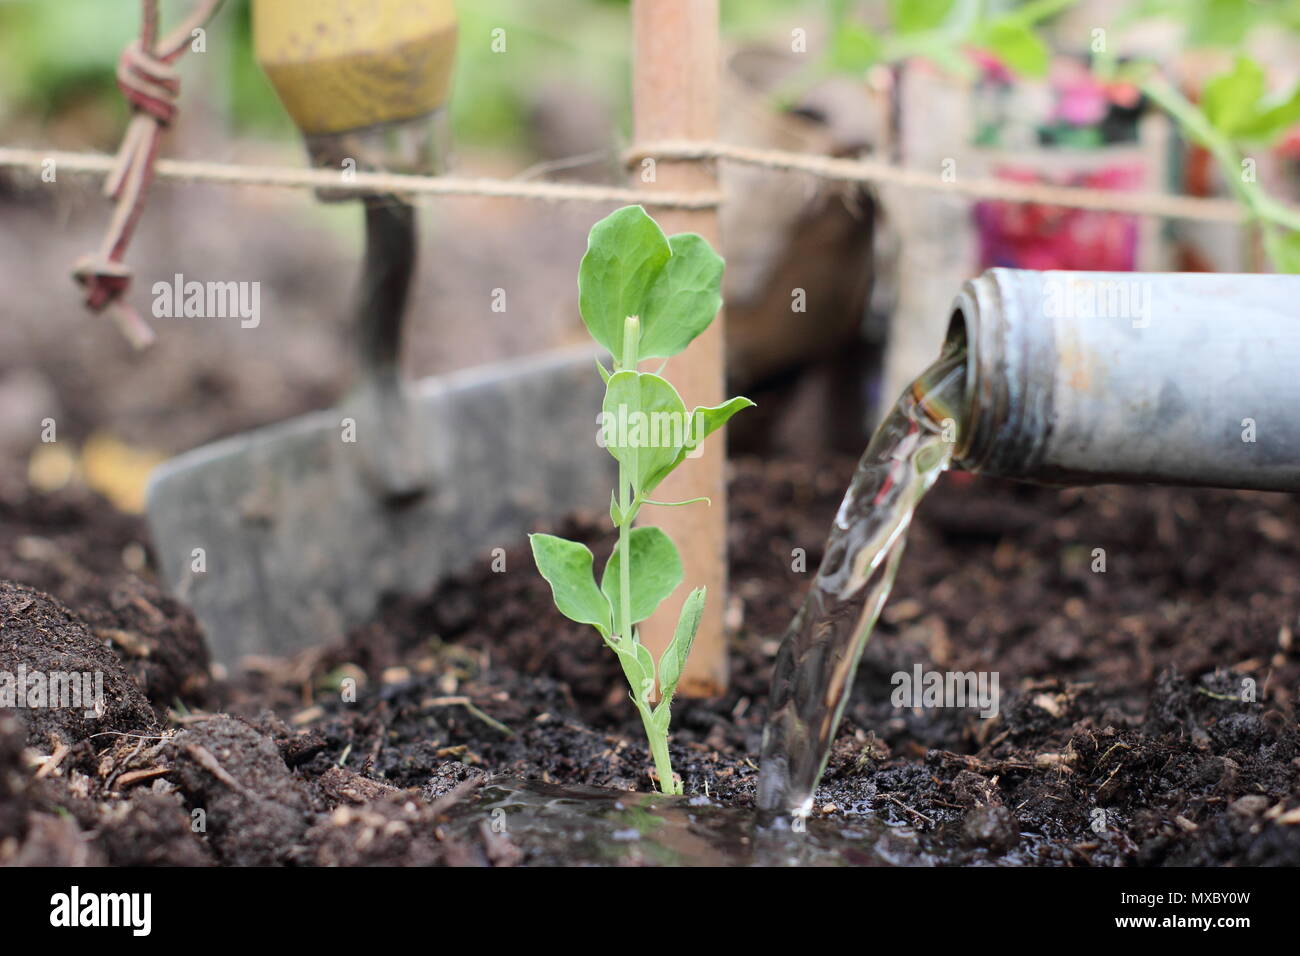 Lathyrus odoratus. Watering a young sweet pea plant at the base of a cane and twine wigwam plant support, spring, UK Stock Photo